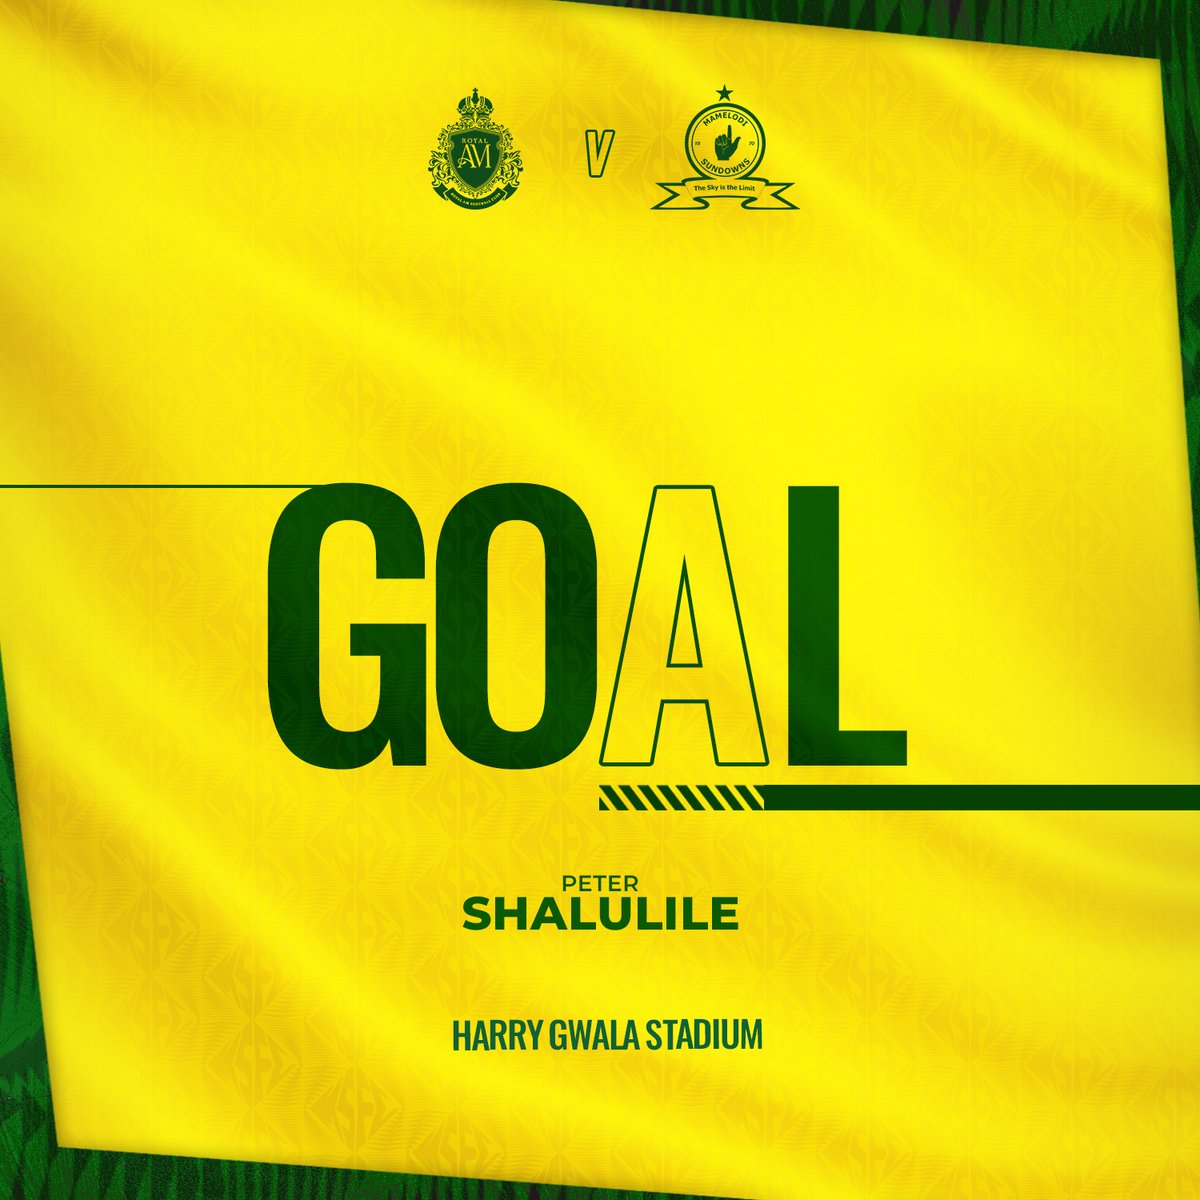 41' GOOOOAAAAL! A moment of absolute brilliance from Shalulile as he opens the scoring with an acrobatic finish!! #Sundowns #DownsLive #DStvPrem